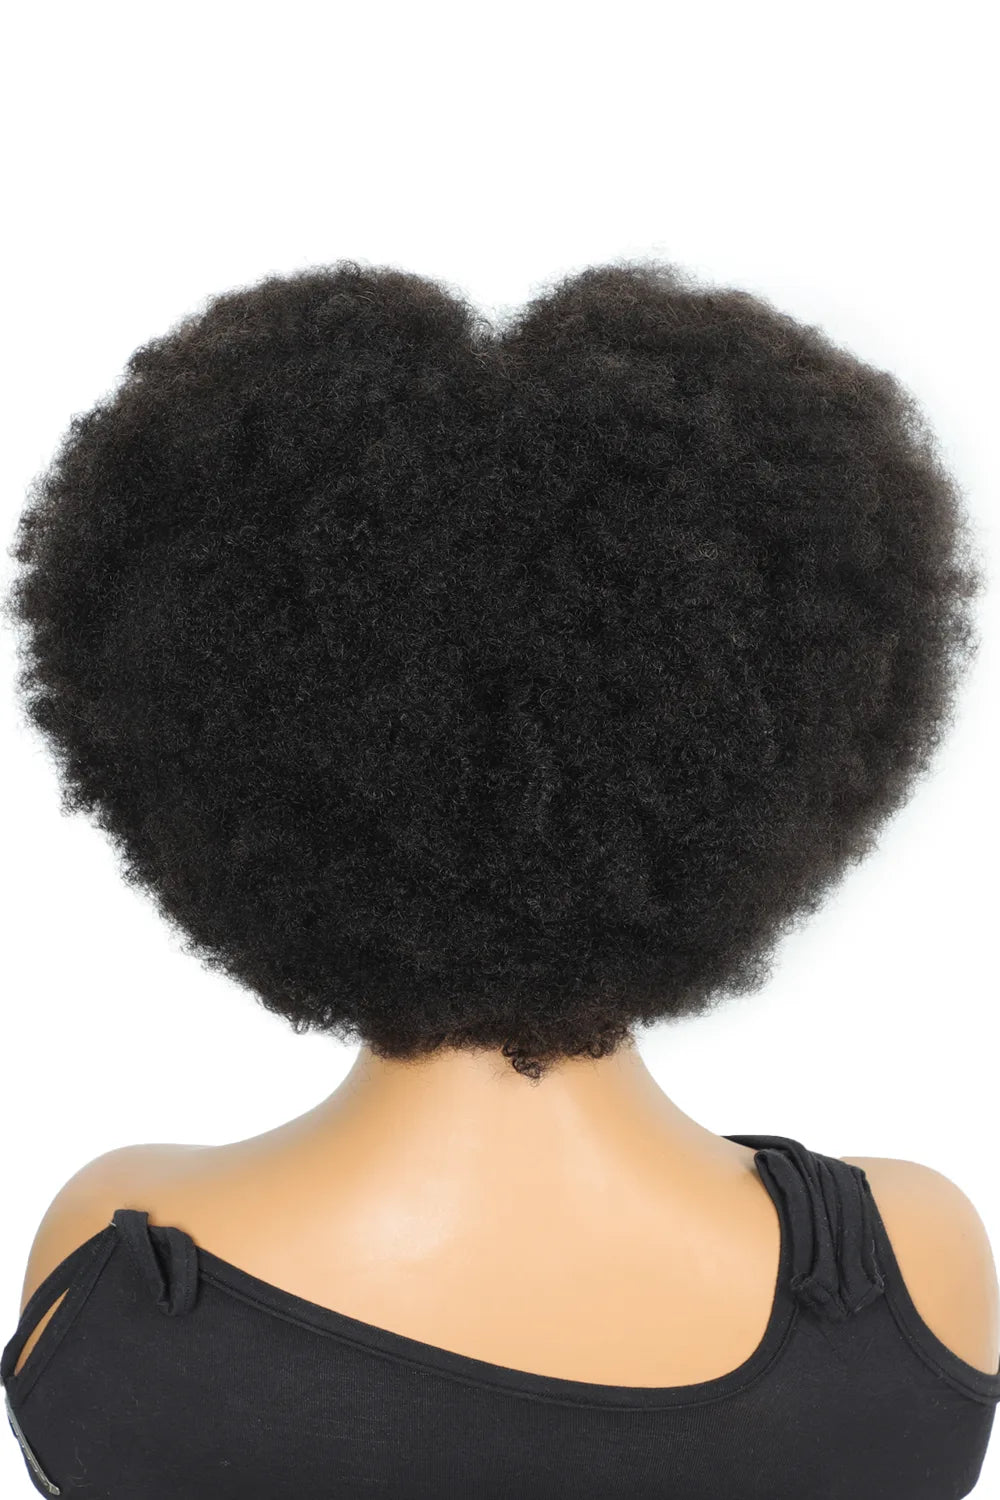 13x1 lace front wig afro bob black 4c hair natural hairline rear view